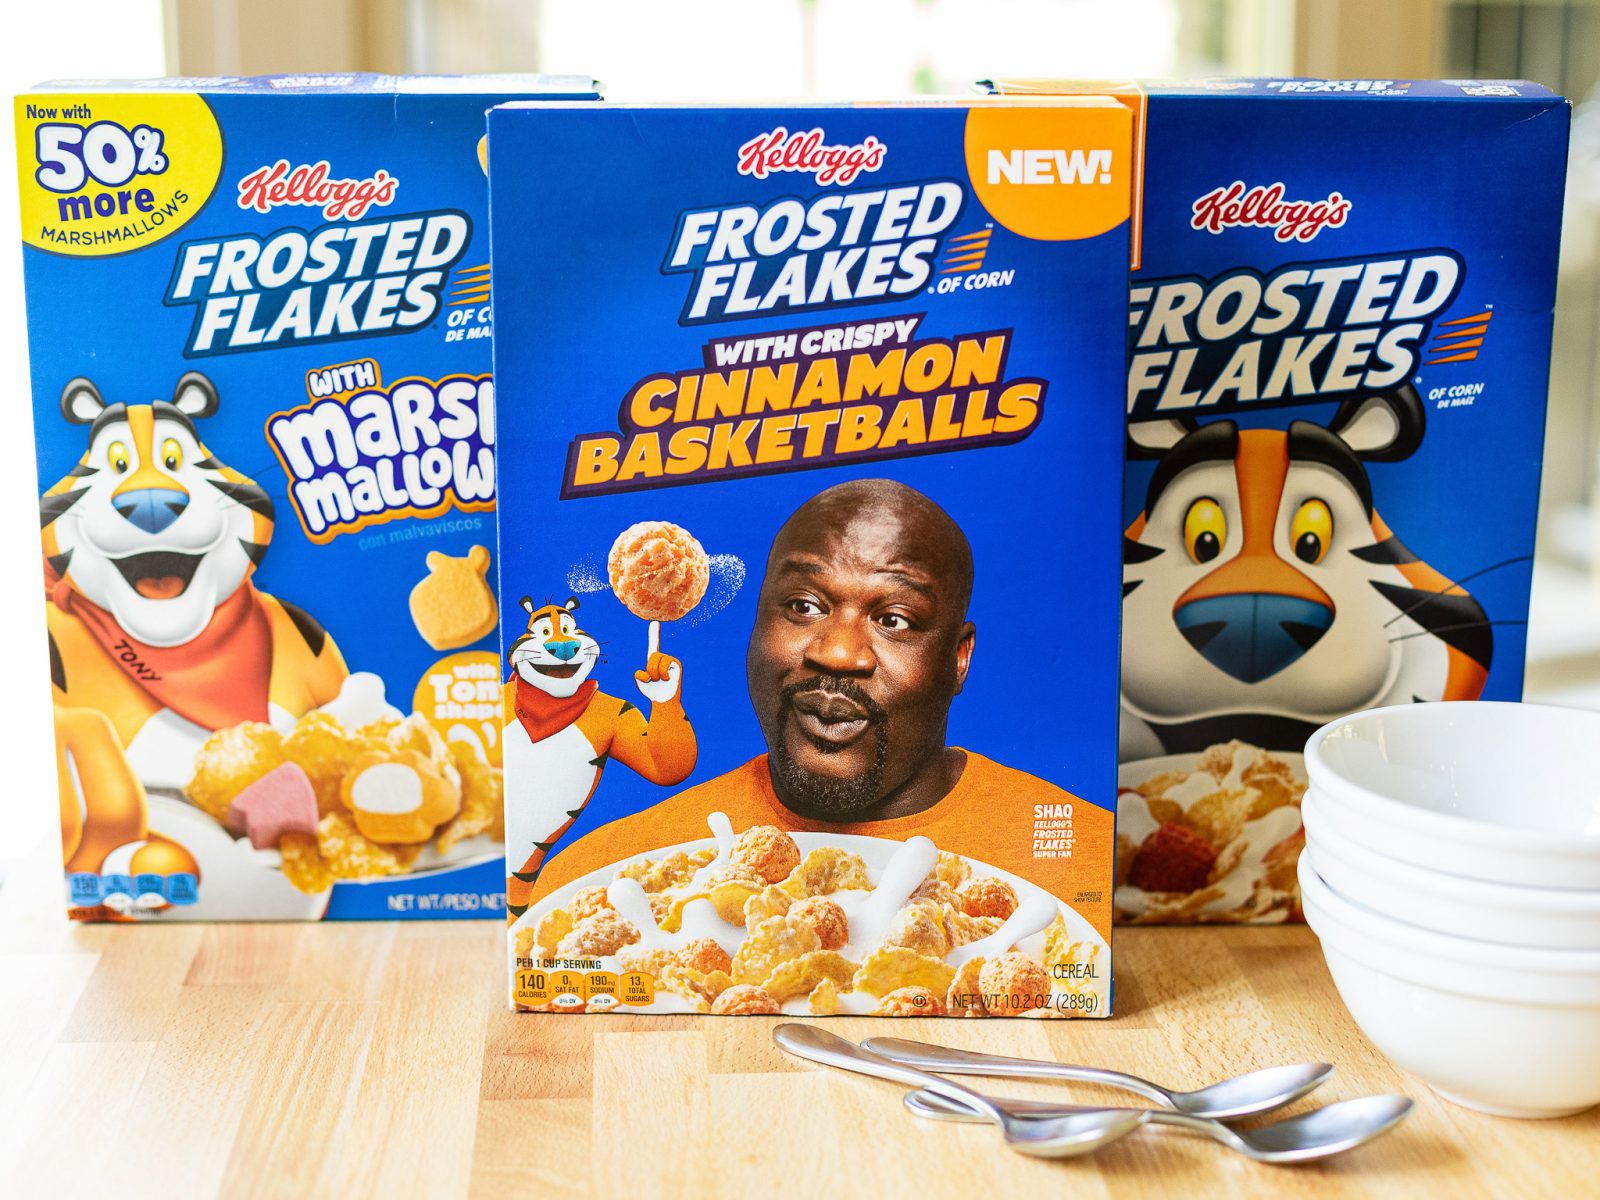 Kellogg’s Frosted Flakes Are BOGO At Publix + Each Box Can Be A $2 Donation To Mission Tiger!